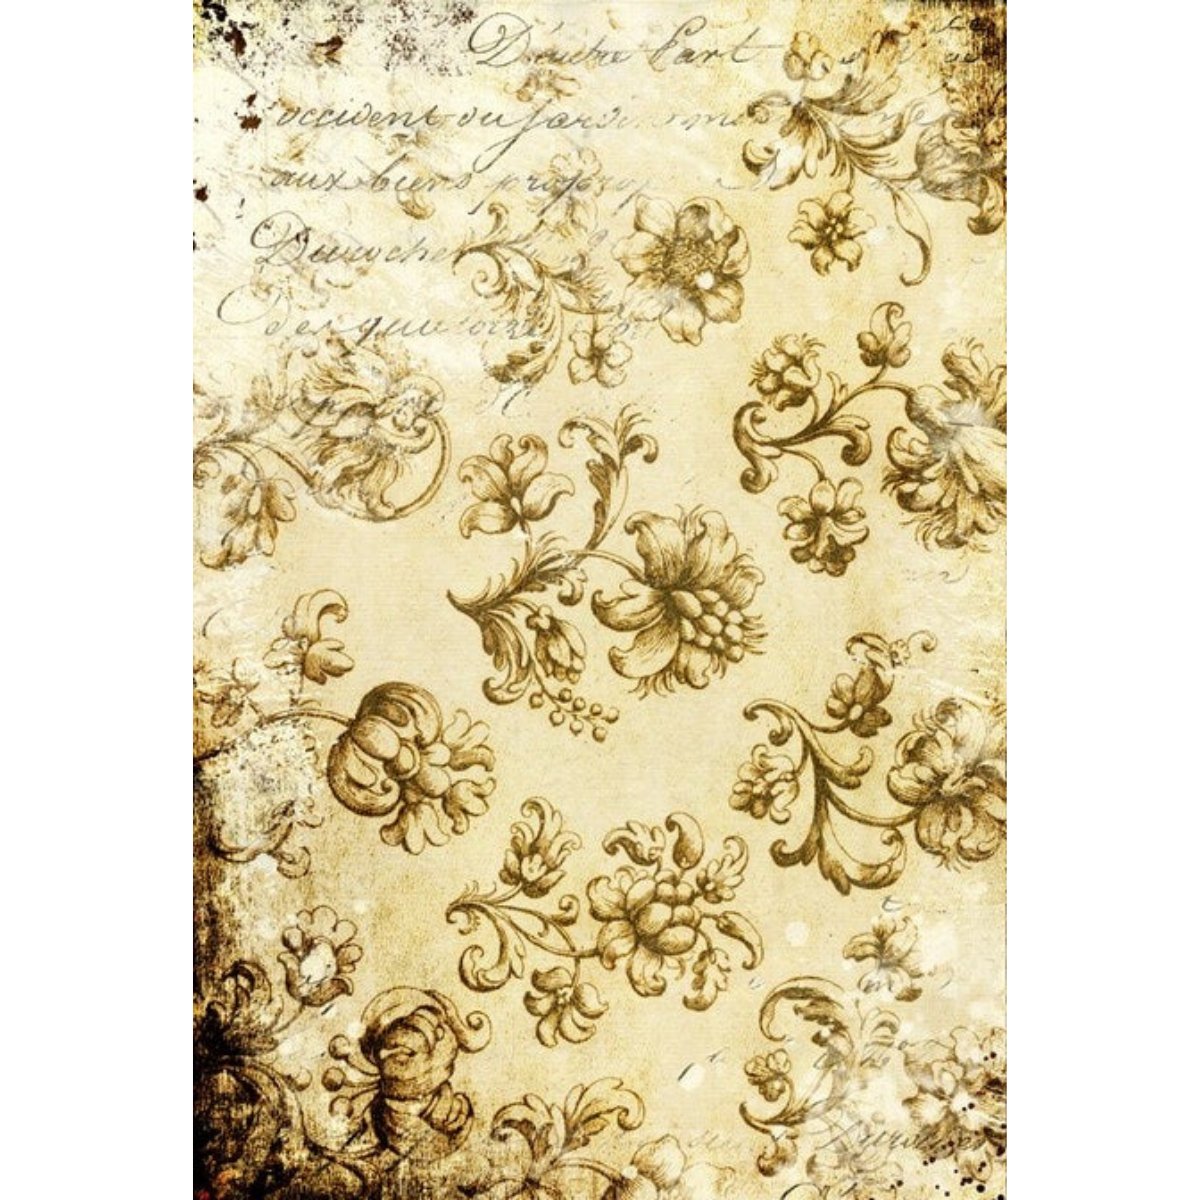 Roycycled Treasures - Distressed Grungy Floral Decoupage Paper - 20x30in - Rustic River Home